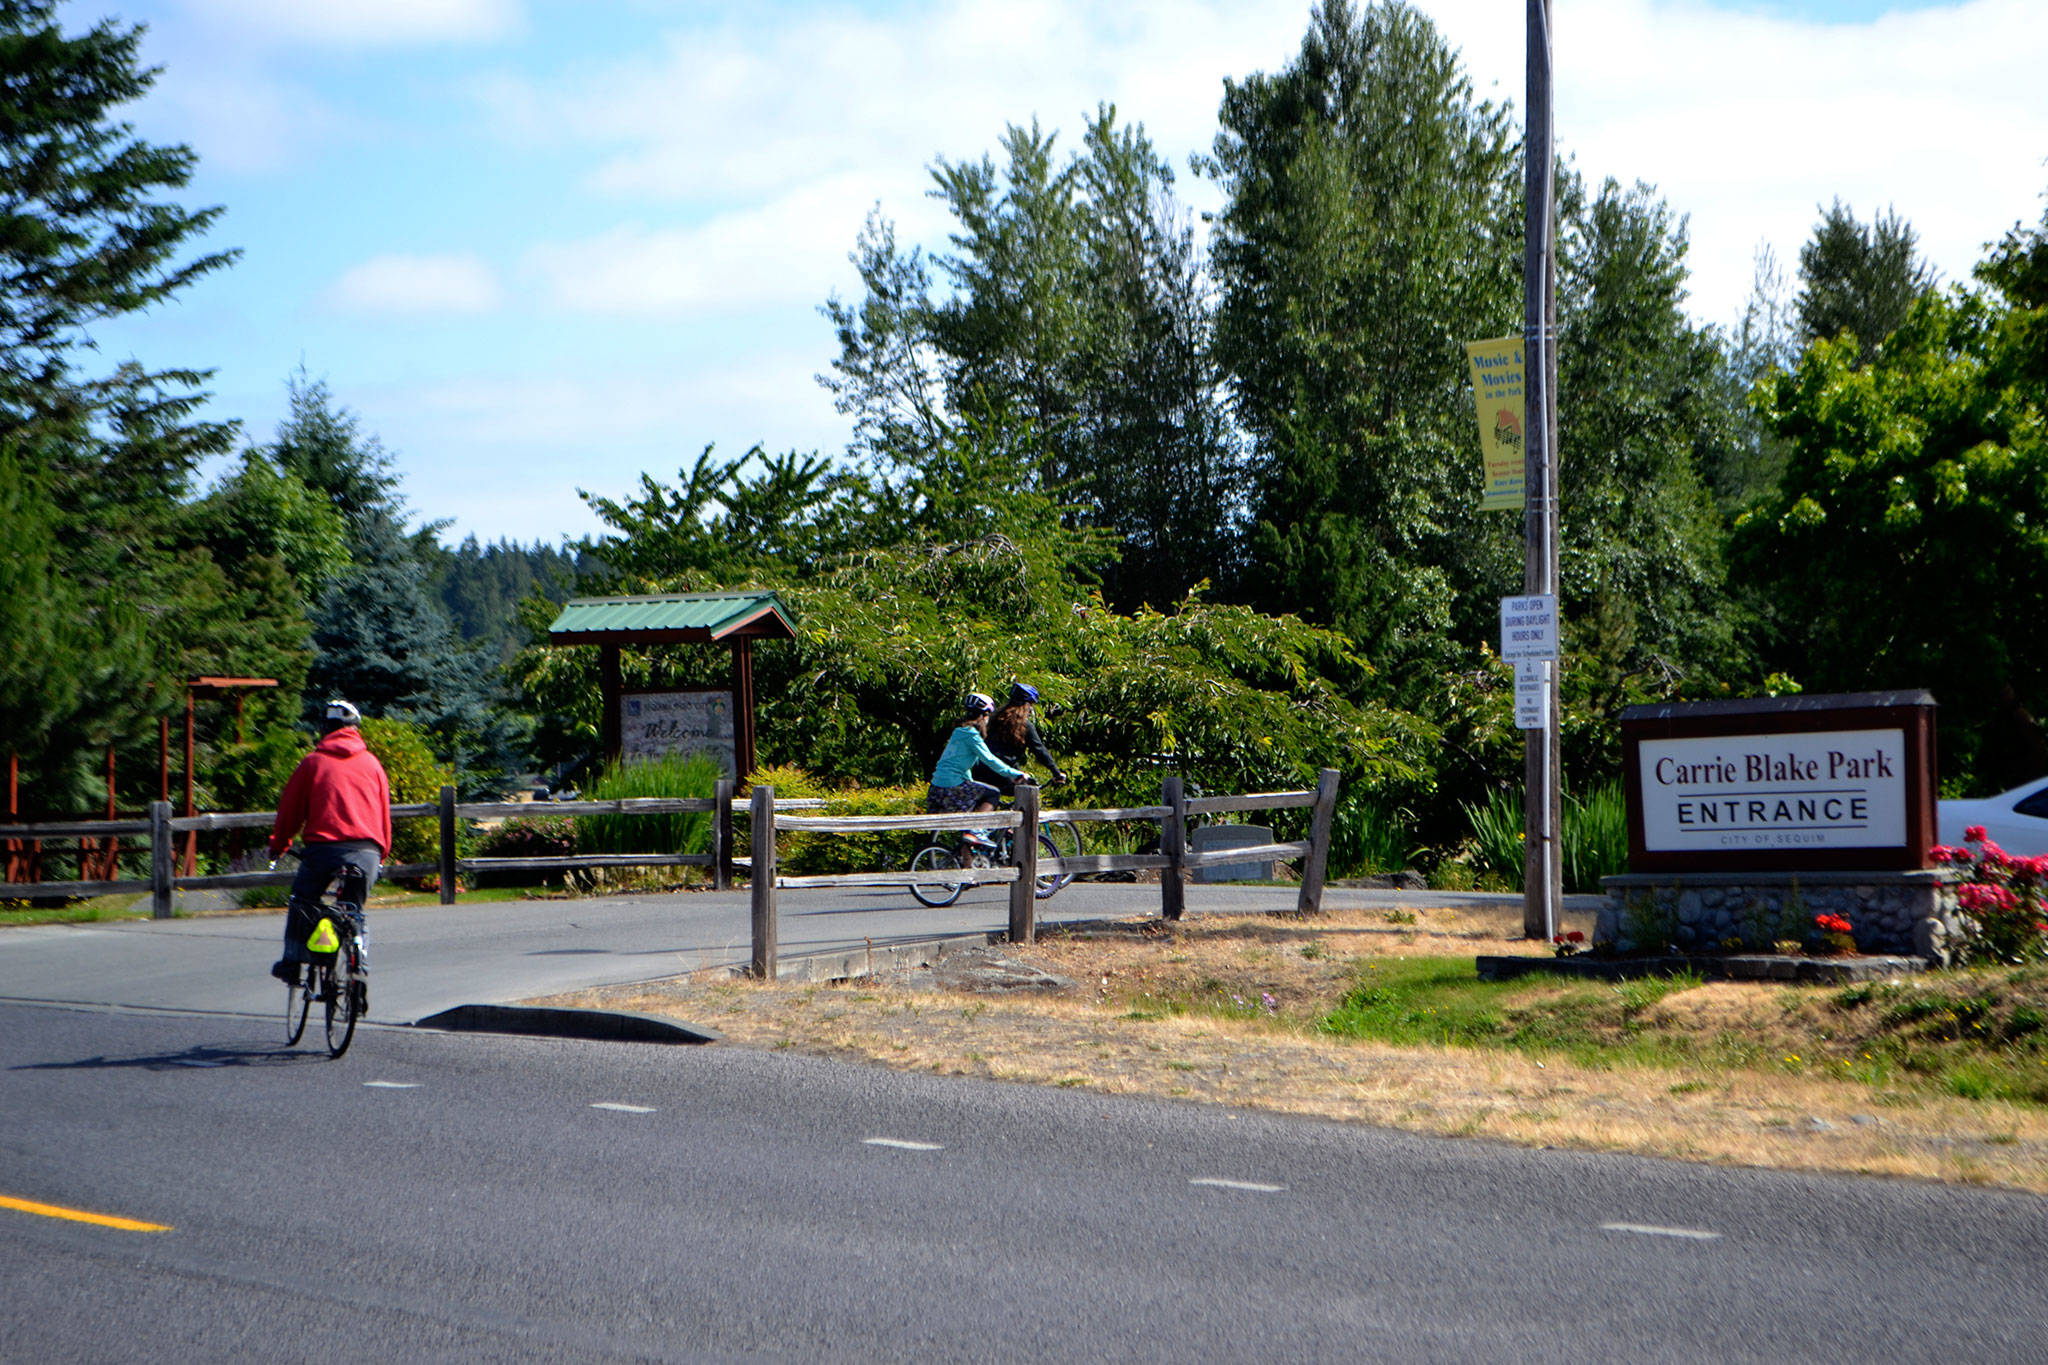 Visitors to Carrie Blake Park off North Blake Avenue in Sequim will soon enter the park through a new gateway. Construction crews break ground in August to realign the entrance between the Sequim Skate Park and Trinity United Methodist Church. Sequim Gazette photo by Matthew Nash